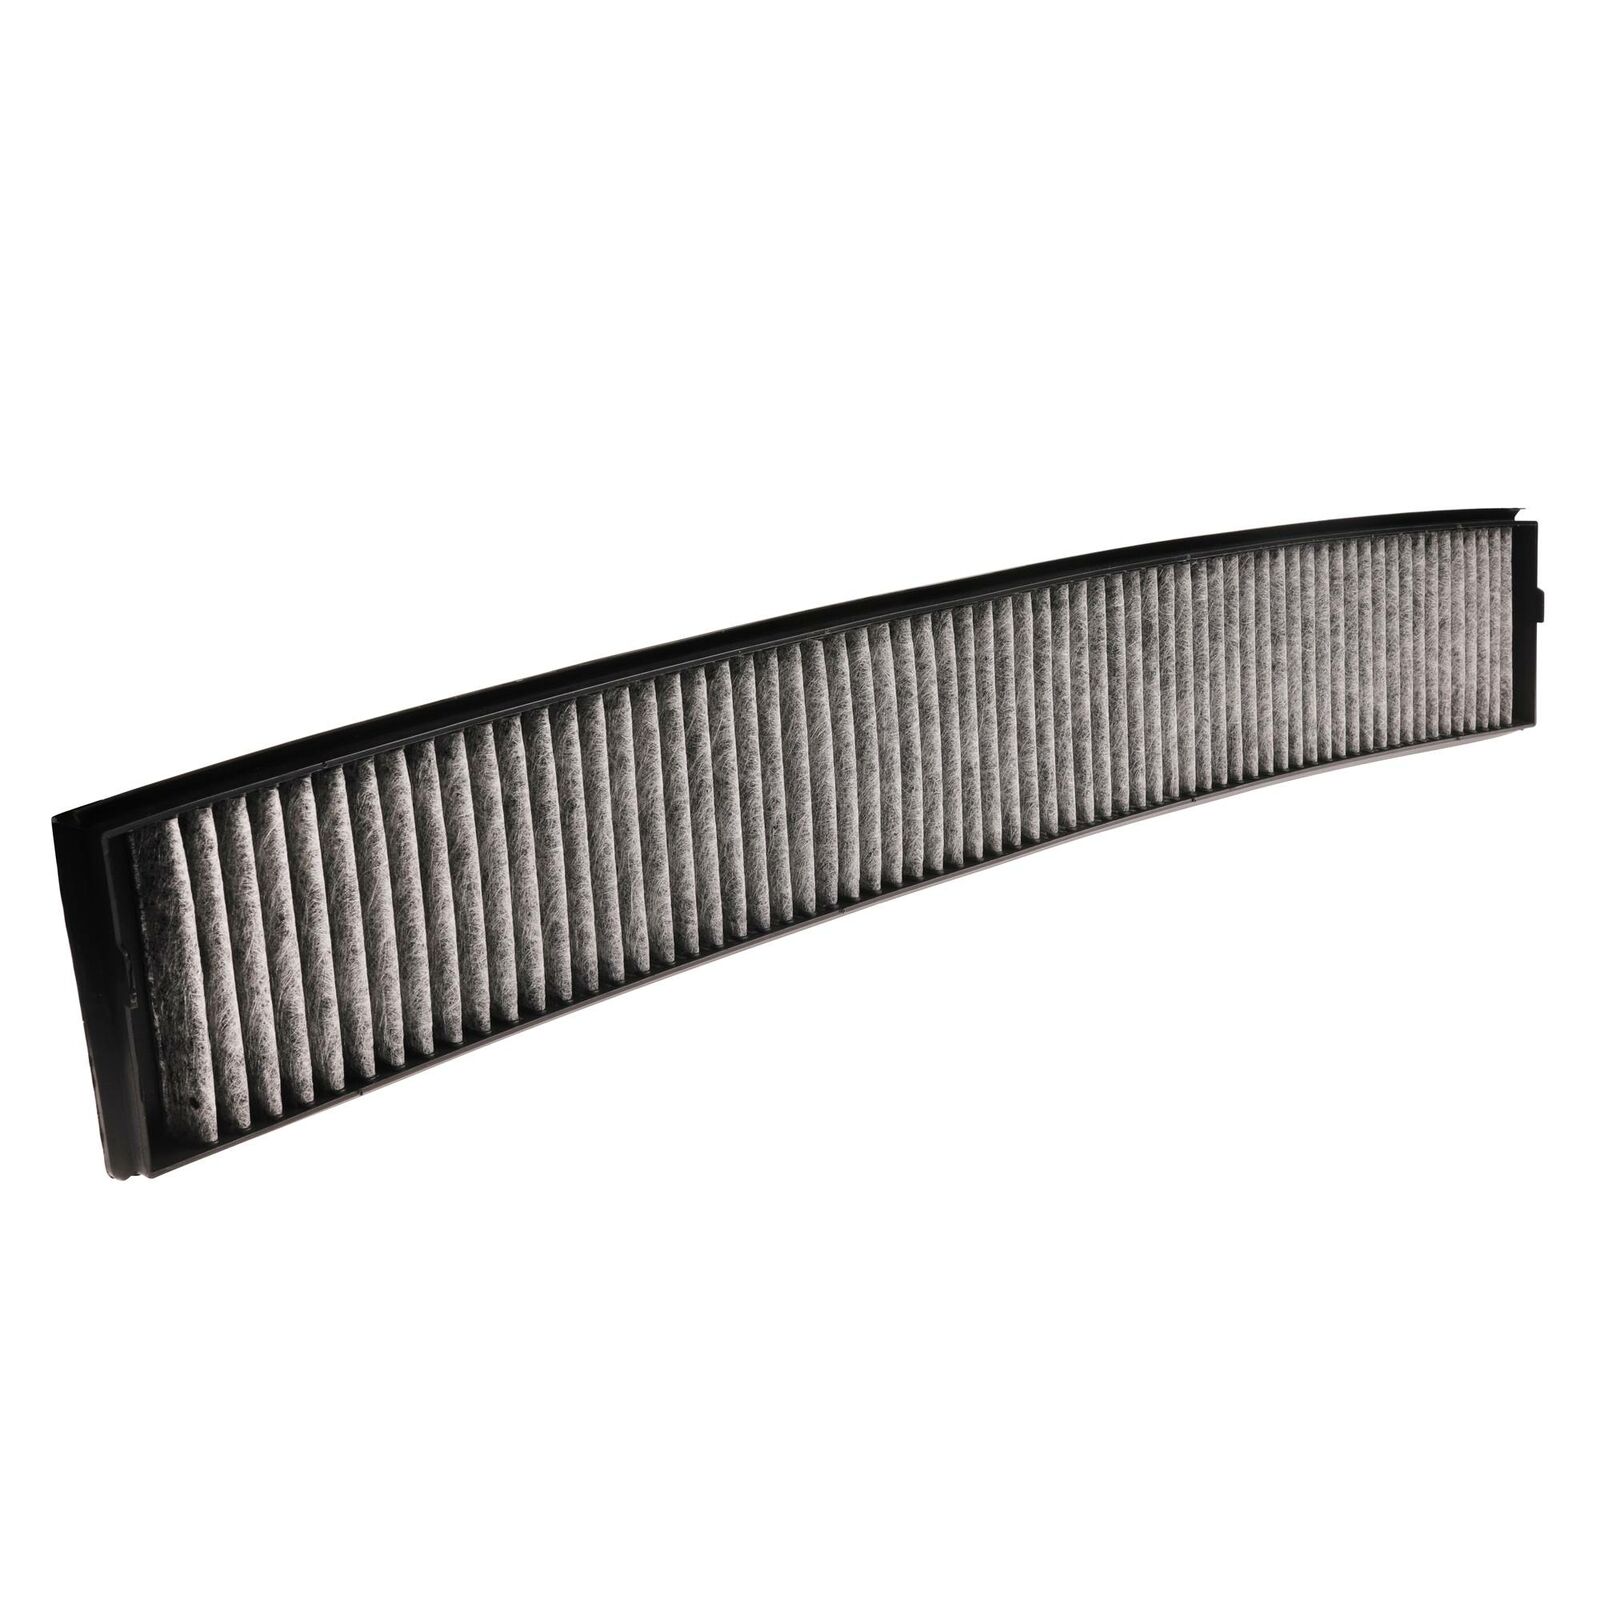 NEW Cabin Air Filter Carbon CUK6724 Mann For BMW 323Ci 325i 328i M3 X3 L6 99-10